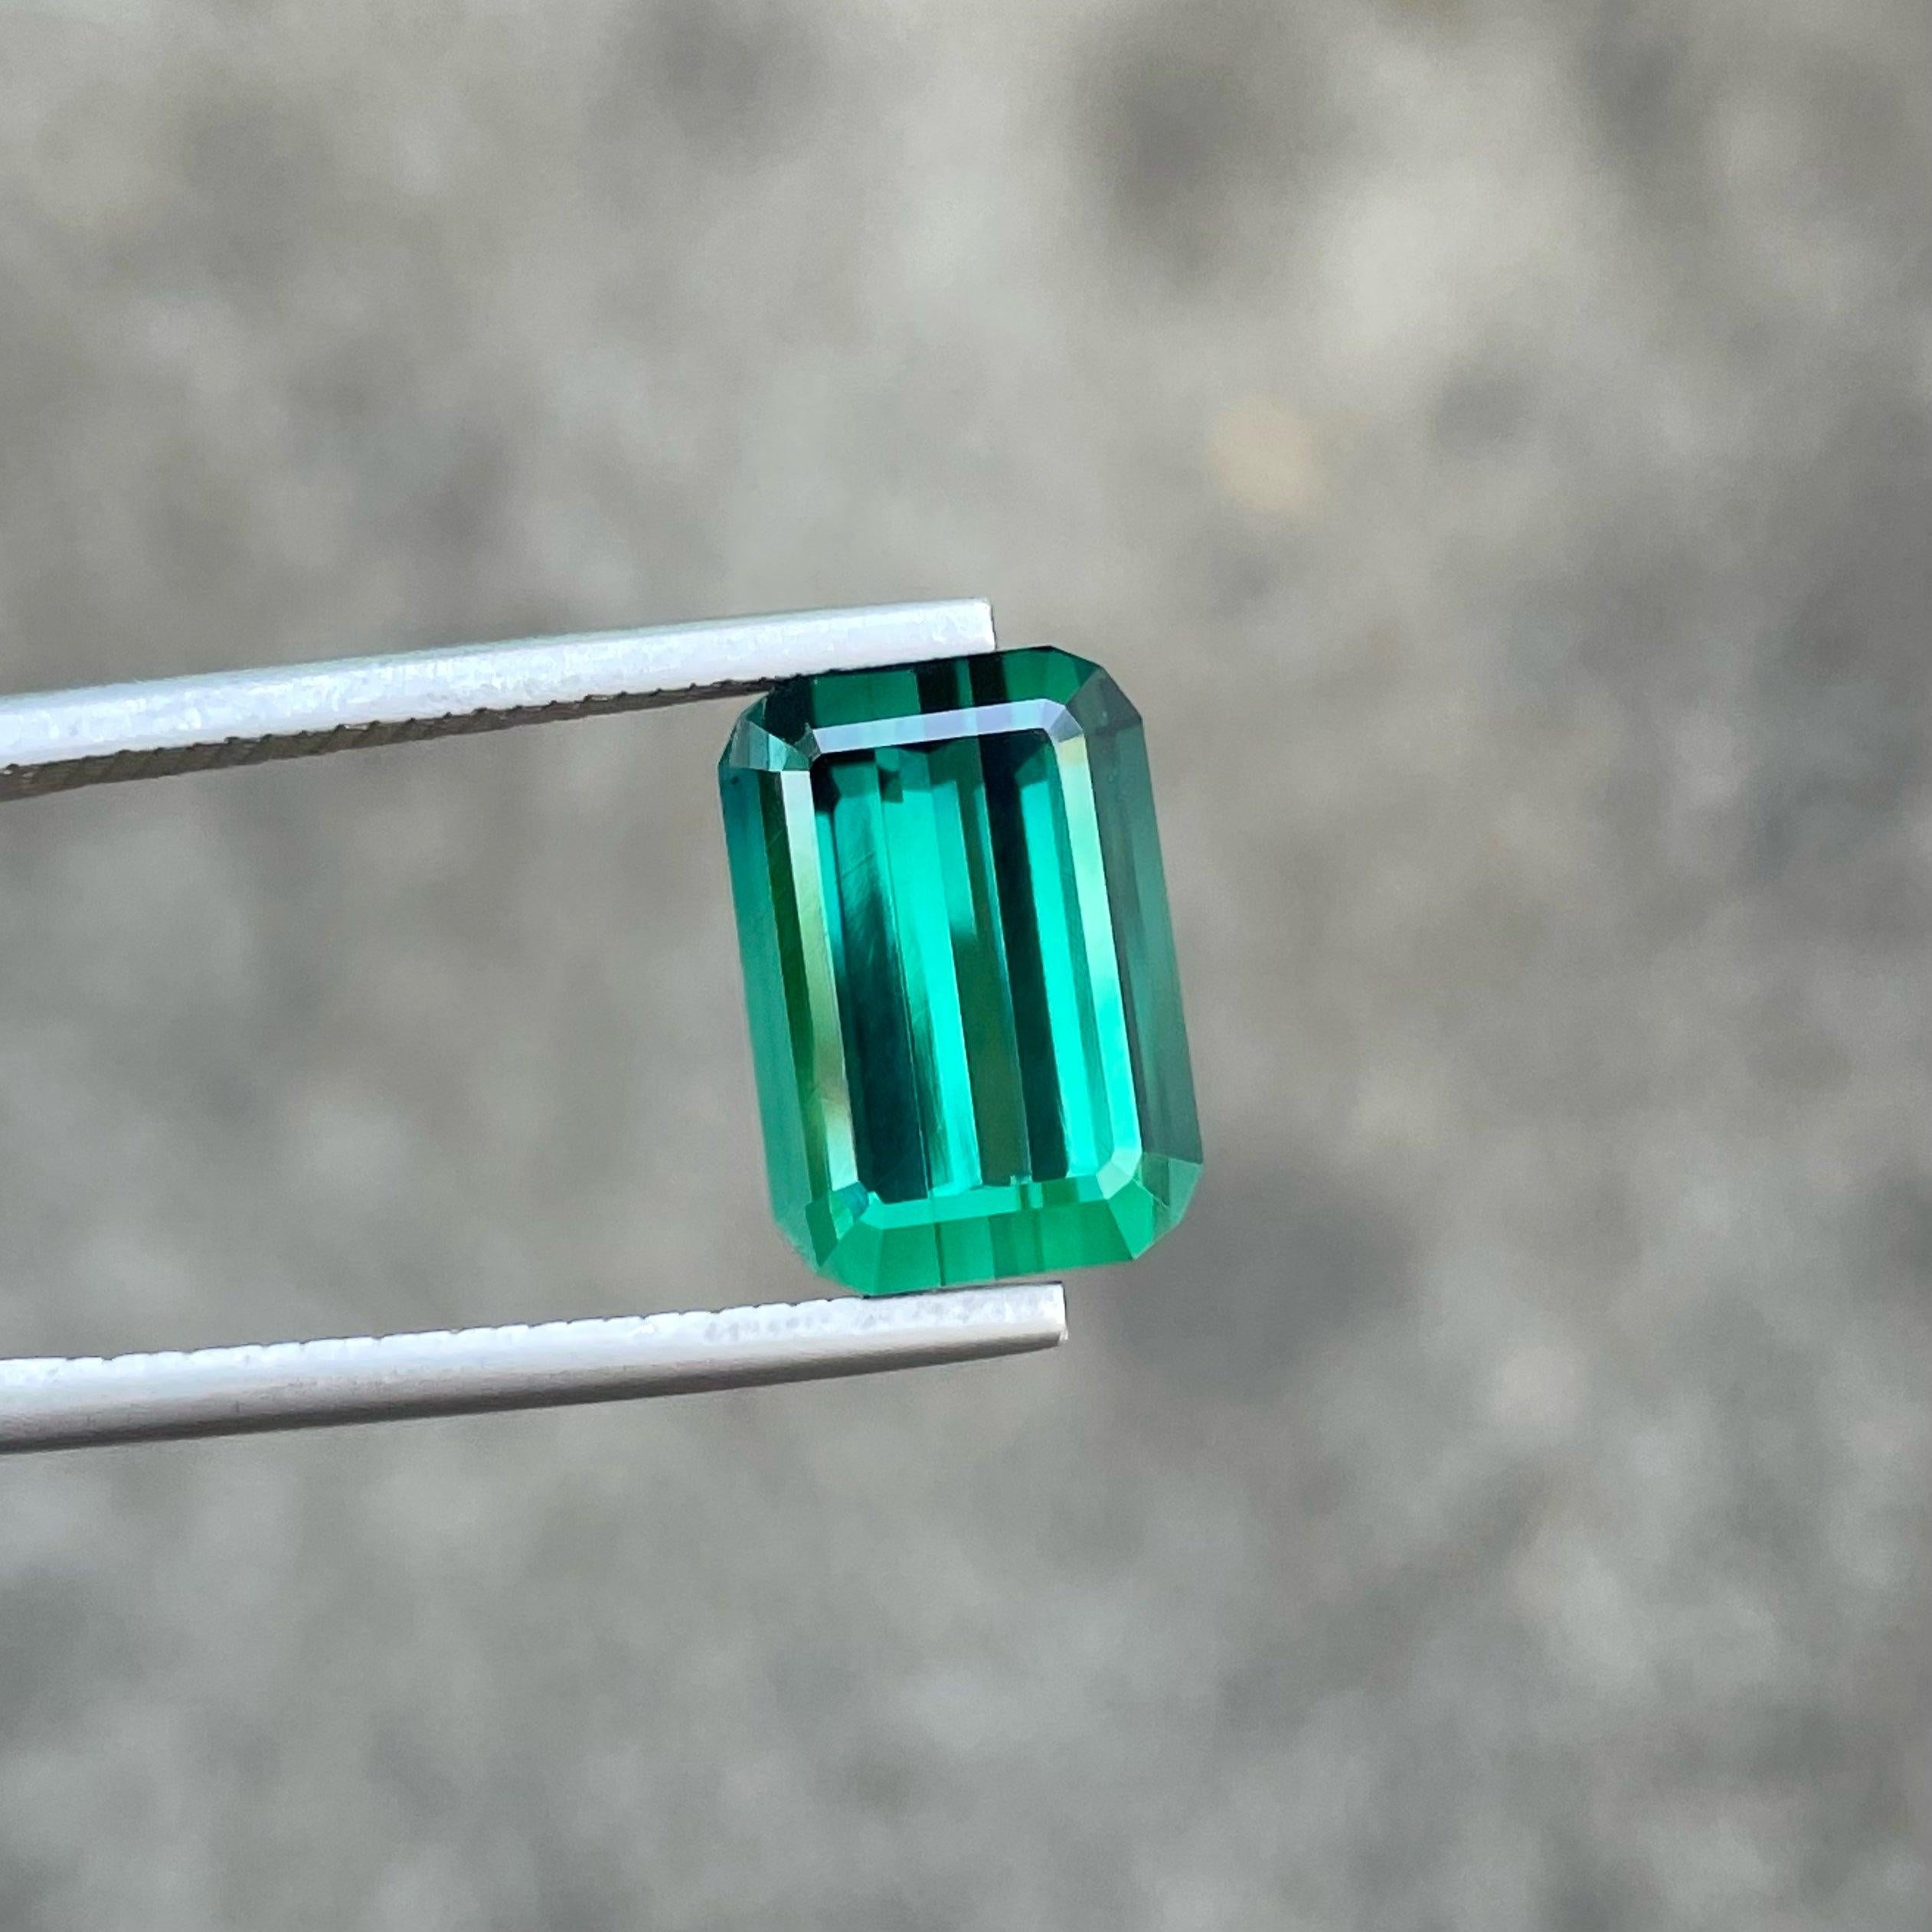 Natural Bluish Green Loose Tourmaline Gemstone, available for sale at wholesale price natural high quality 7.20 Carats Rectangular Shape From Afghanistan.

Product Information:
GEMSTONE TYPE:	Natural Bluish Green Loose Tourmaline